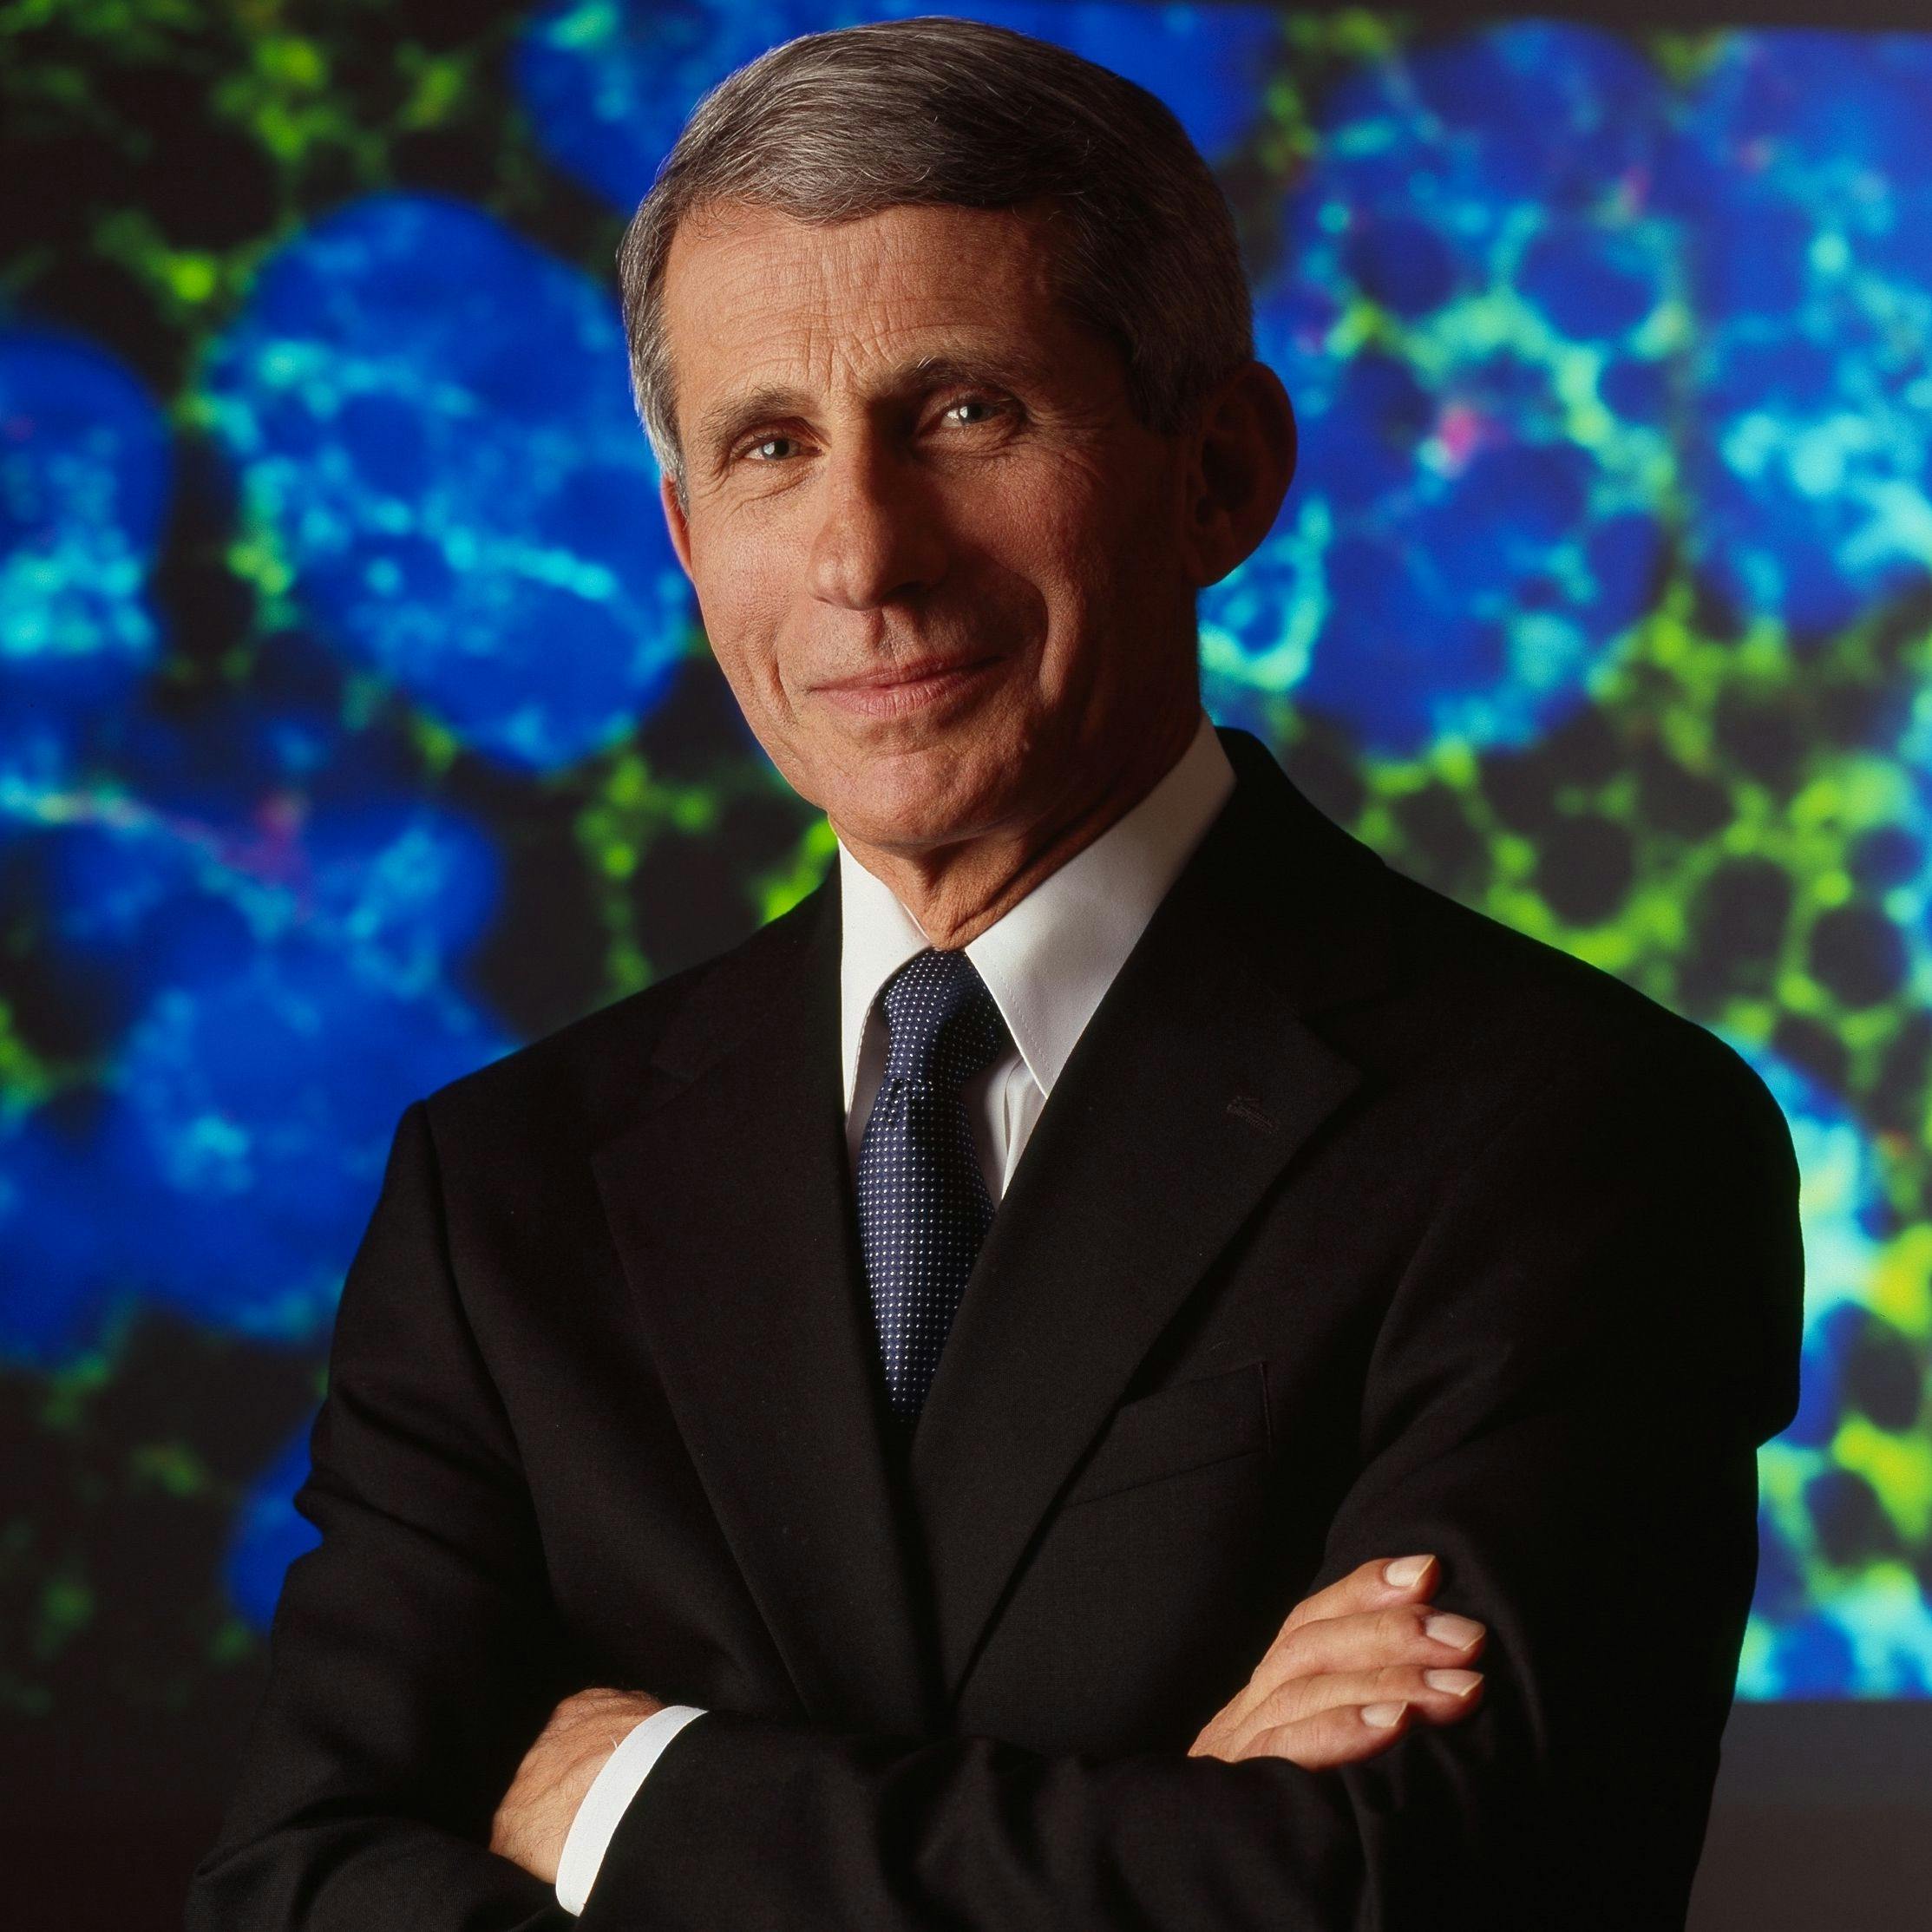 Up Close and Personal with Dr. Anthony Fauci